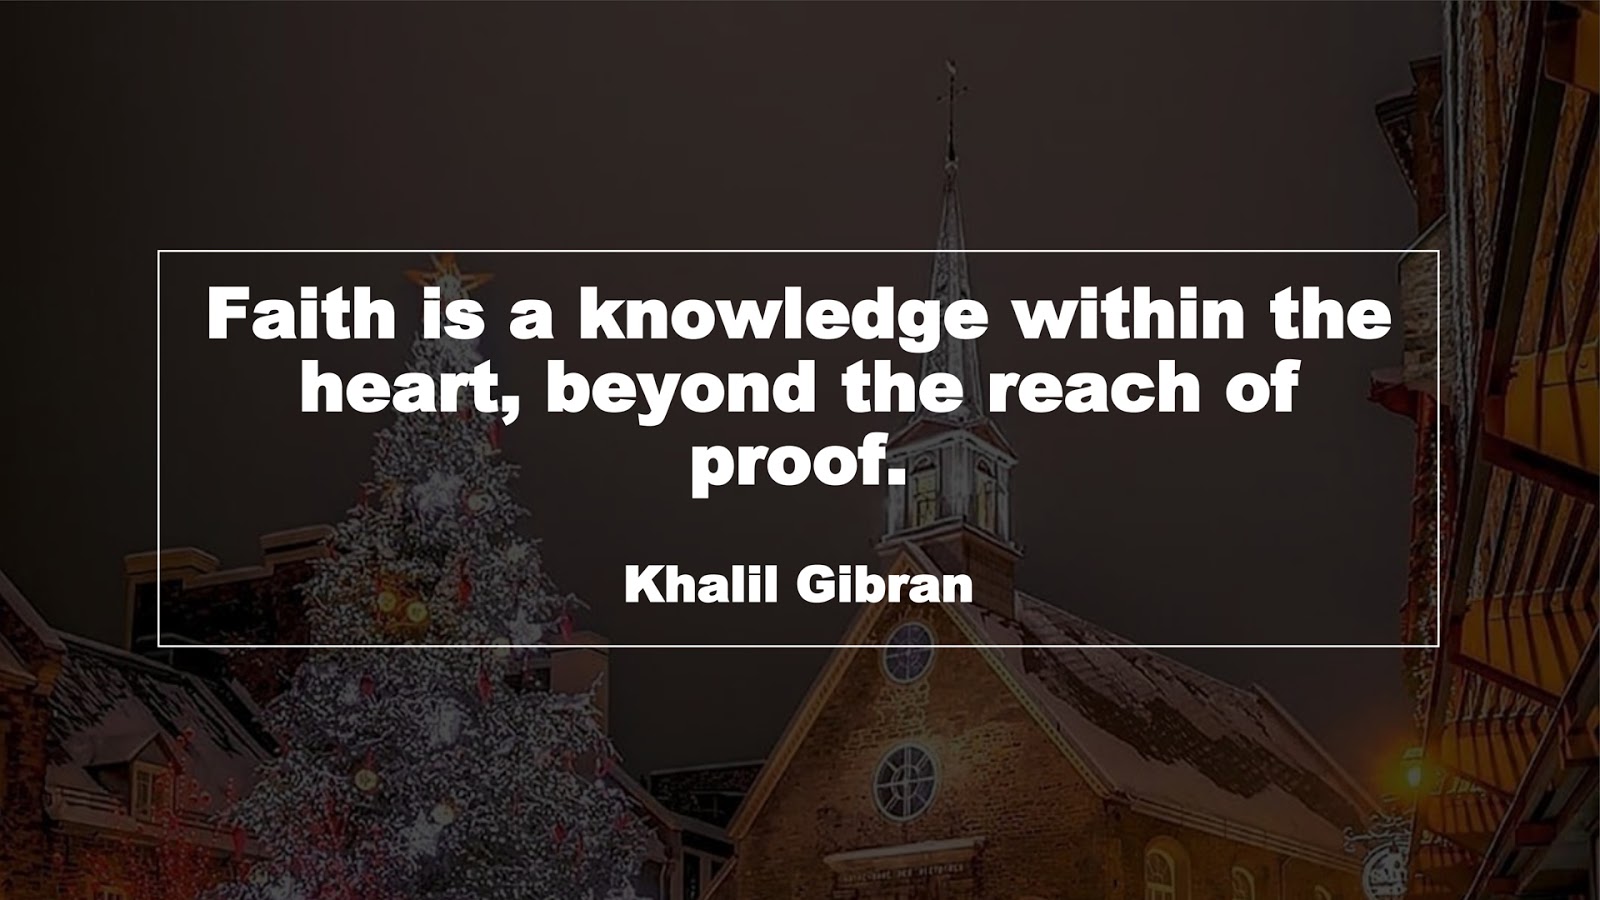 Faith is a knowledge within the heart, beyond the reach of proof. (Khalil Gibran)